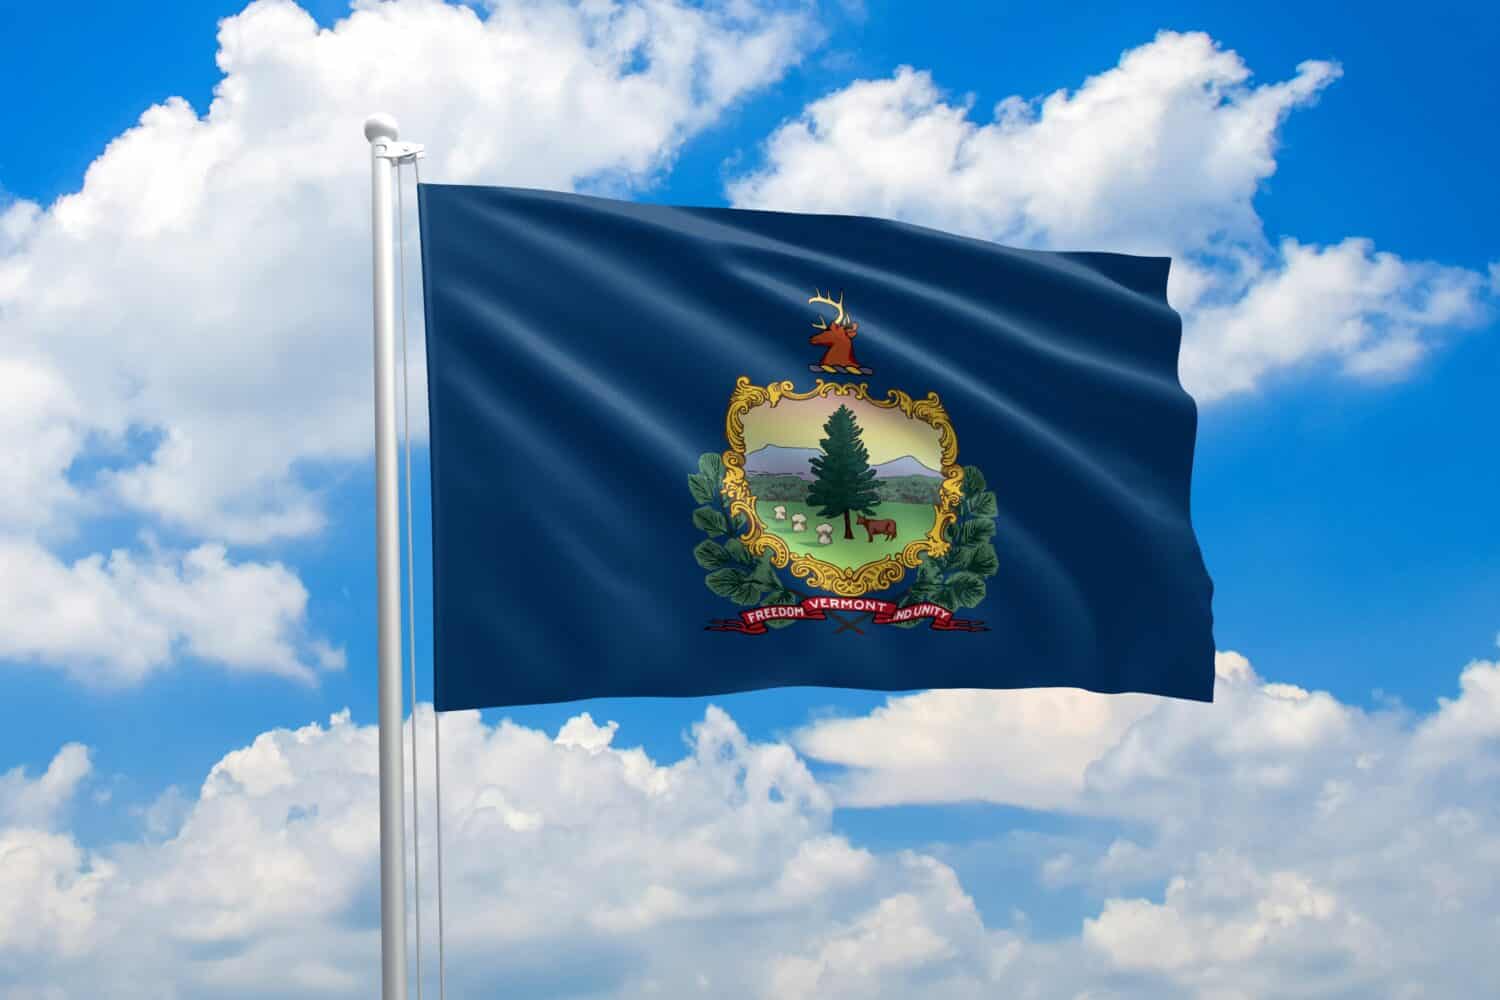 Vermont flag waving in the wind on clouds sky. High quality fabric. International relations concept